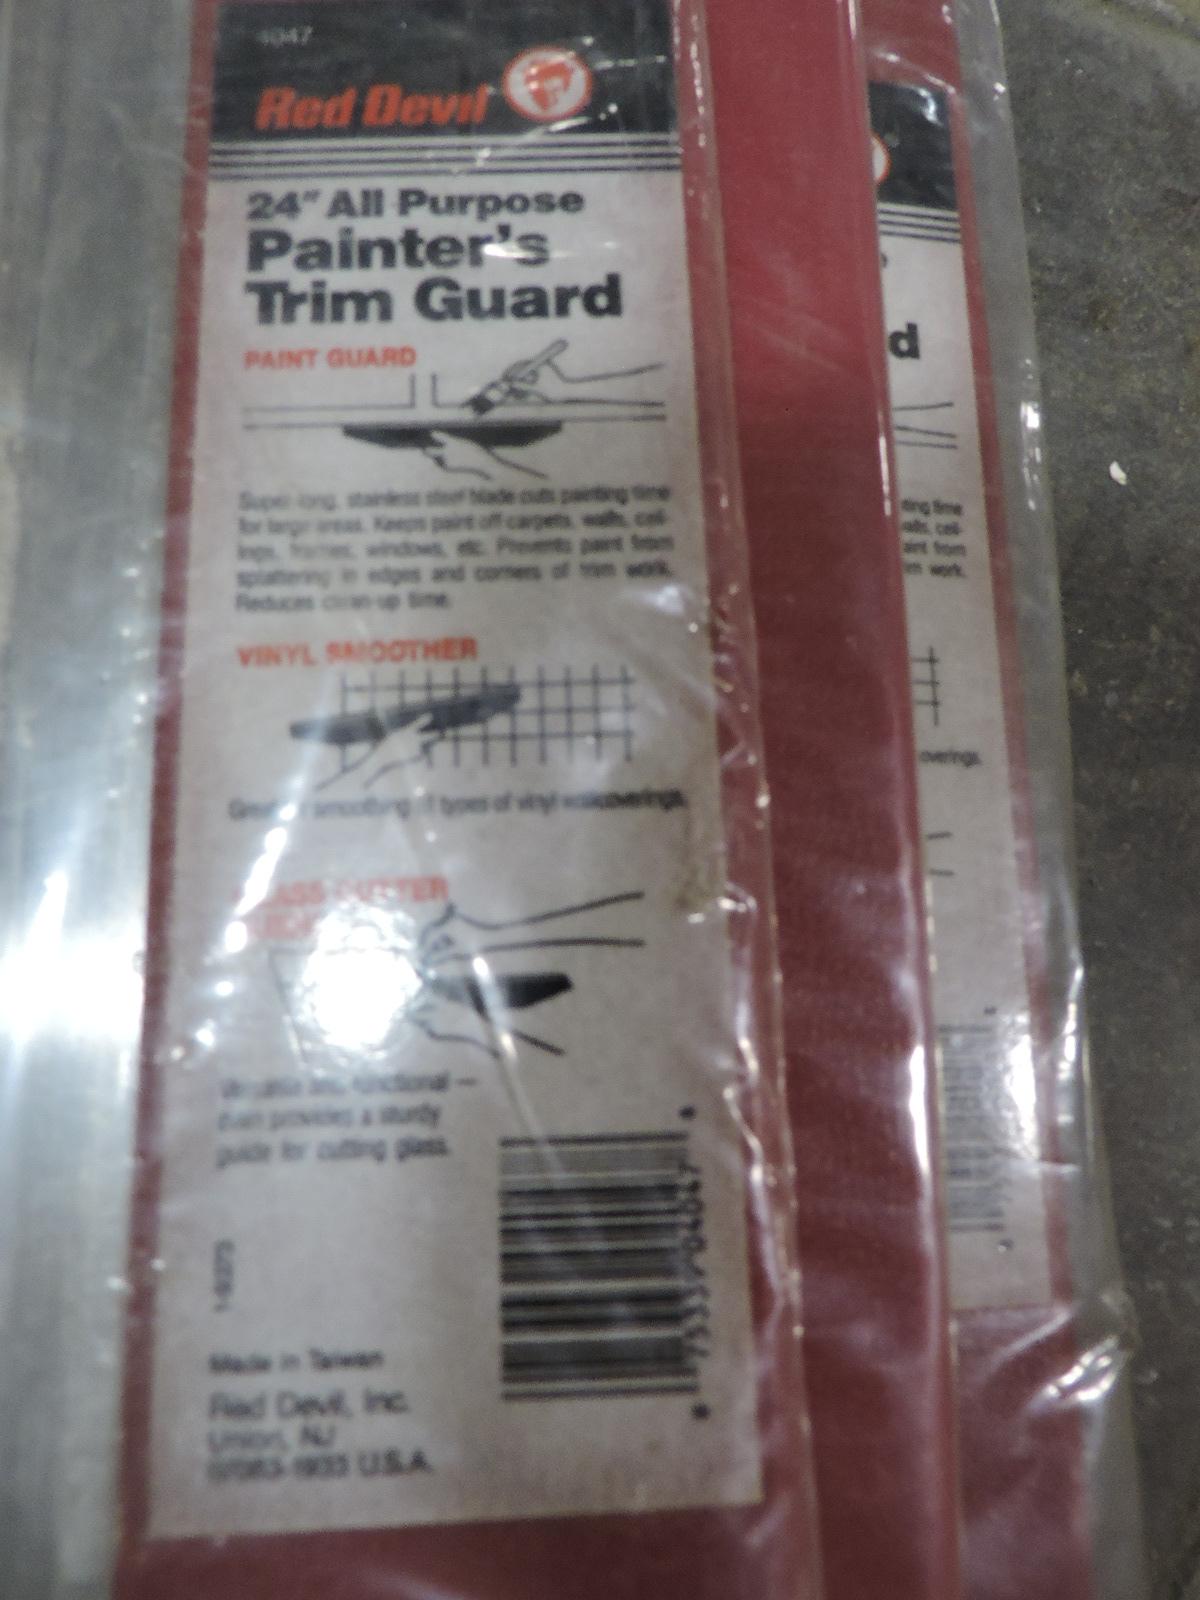 3 RED DEVIL 24" Painters Trim Guard # 4047 -- NEW Old Stock